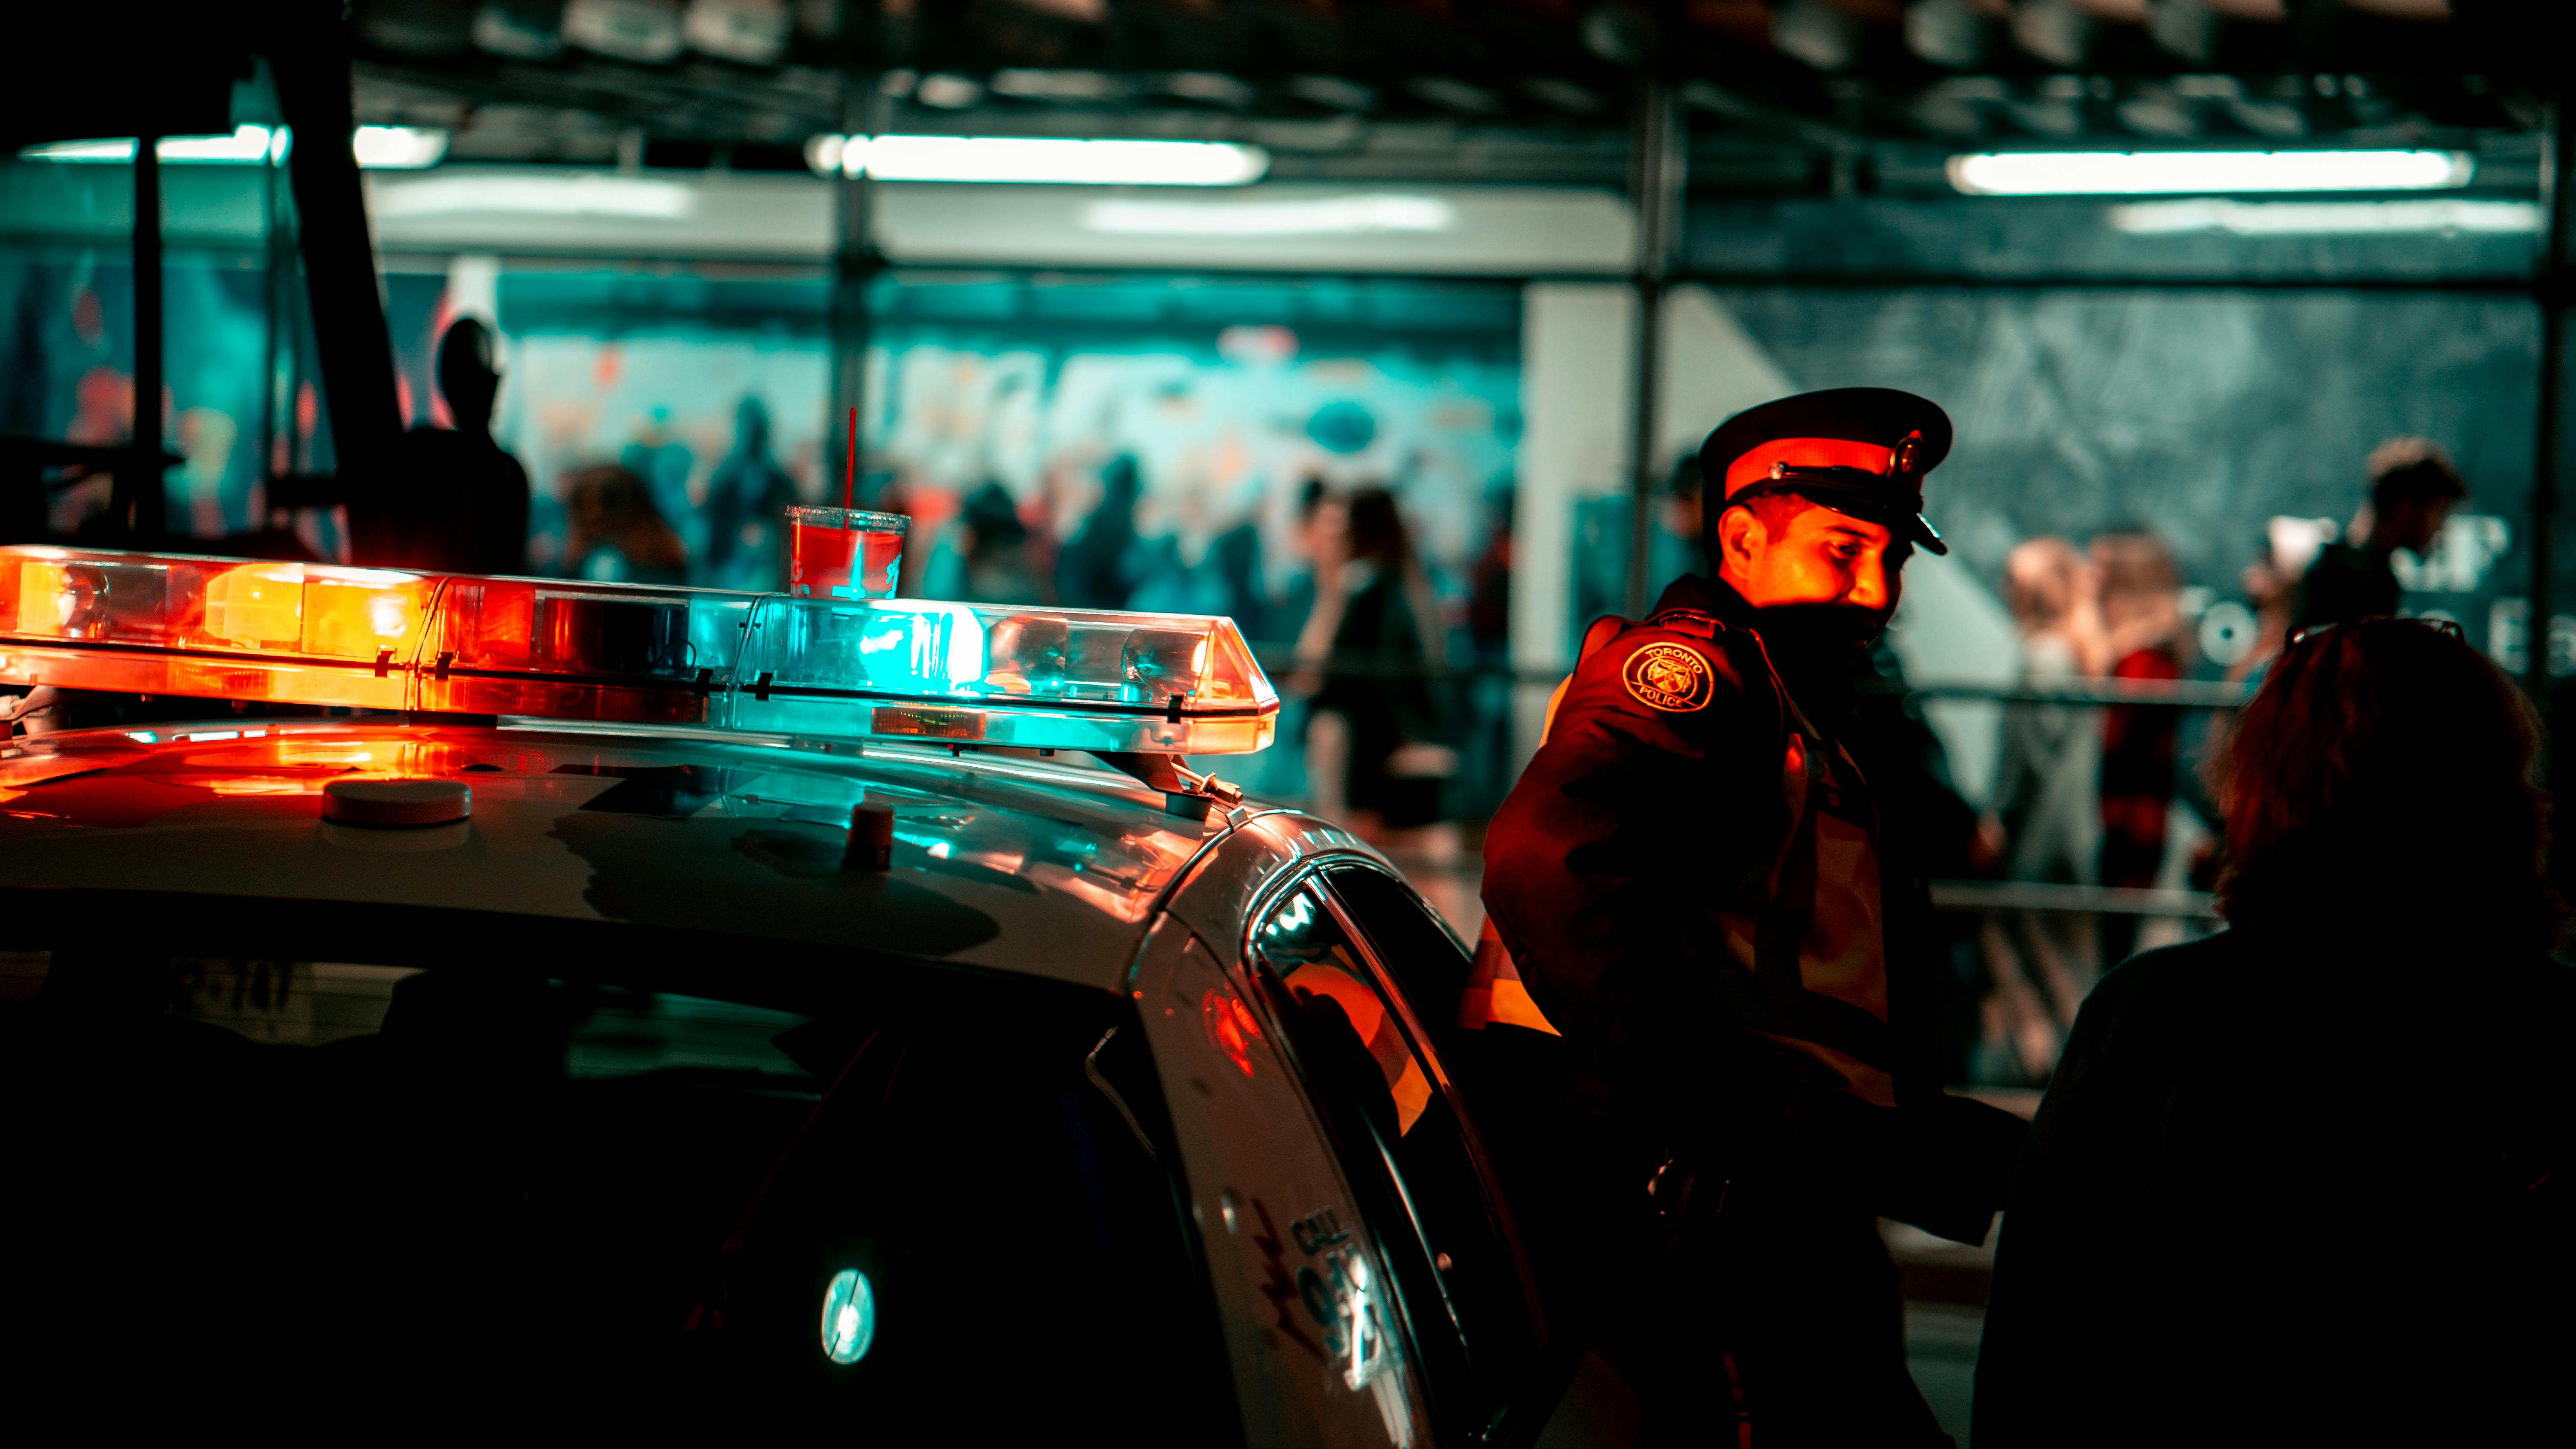 Police standing beside the police car. | Photo: Pexels